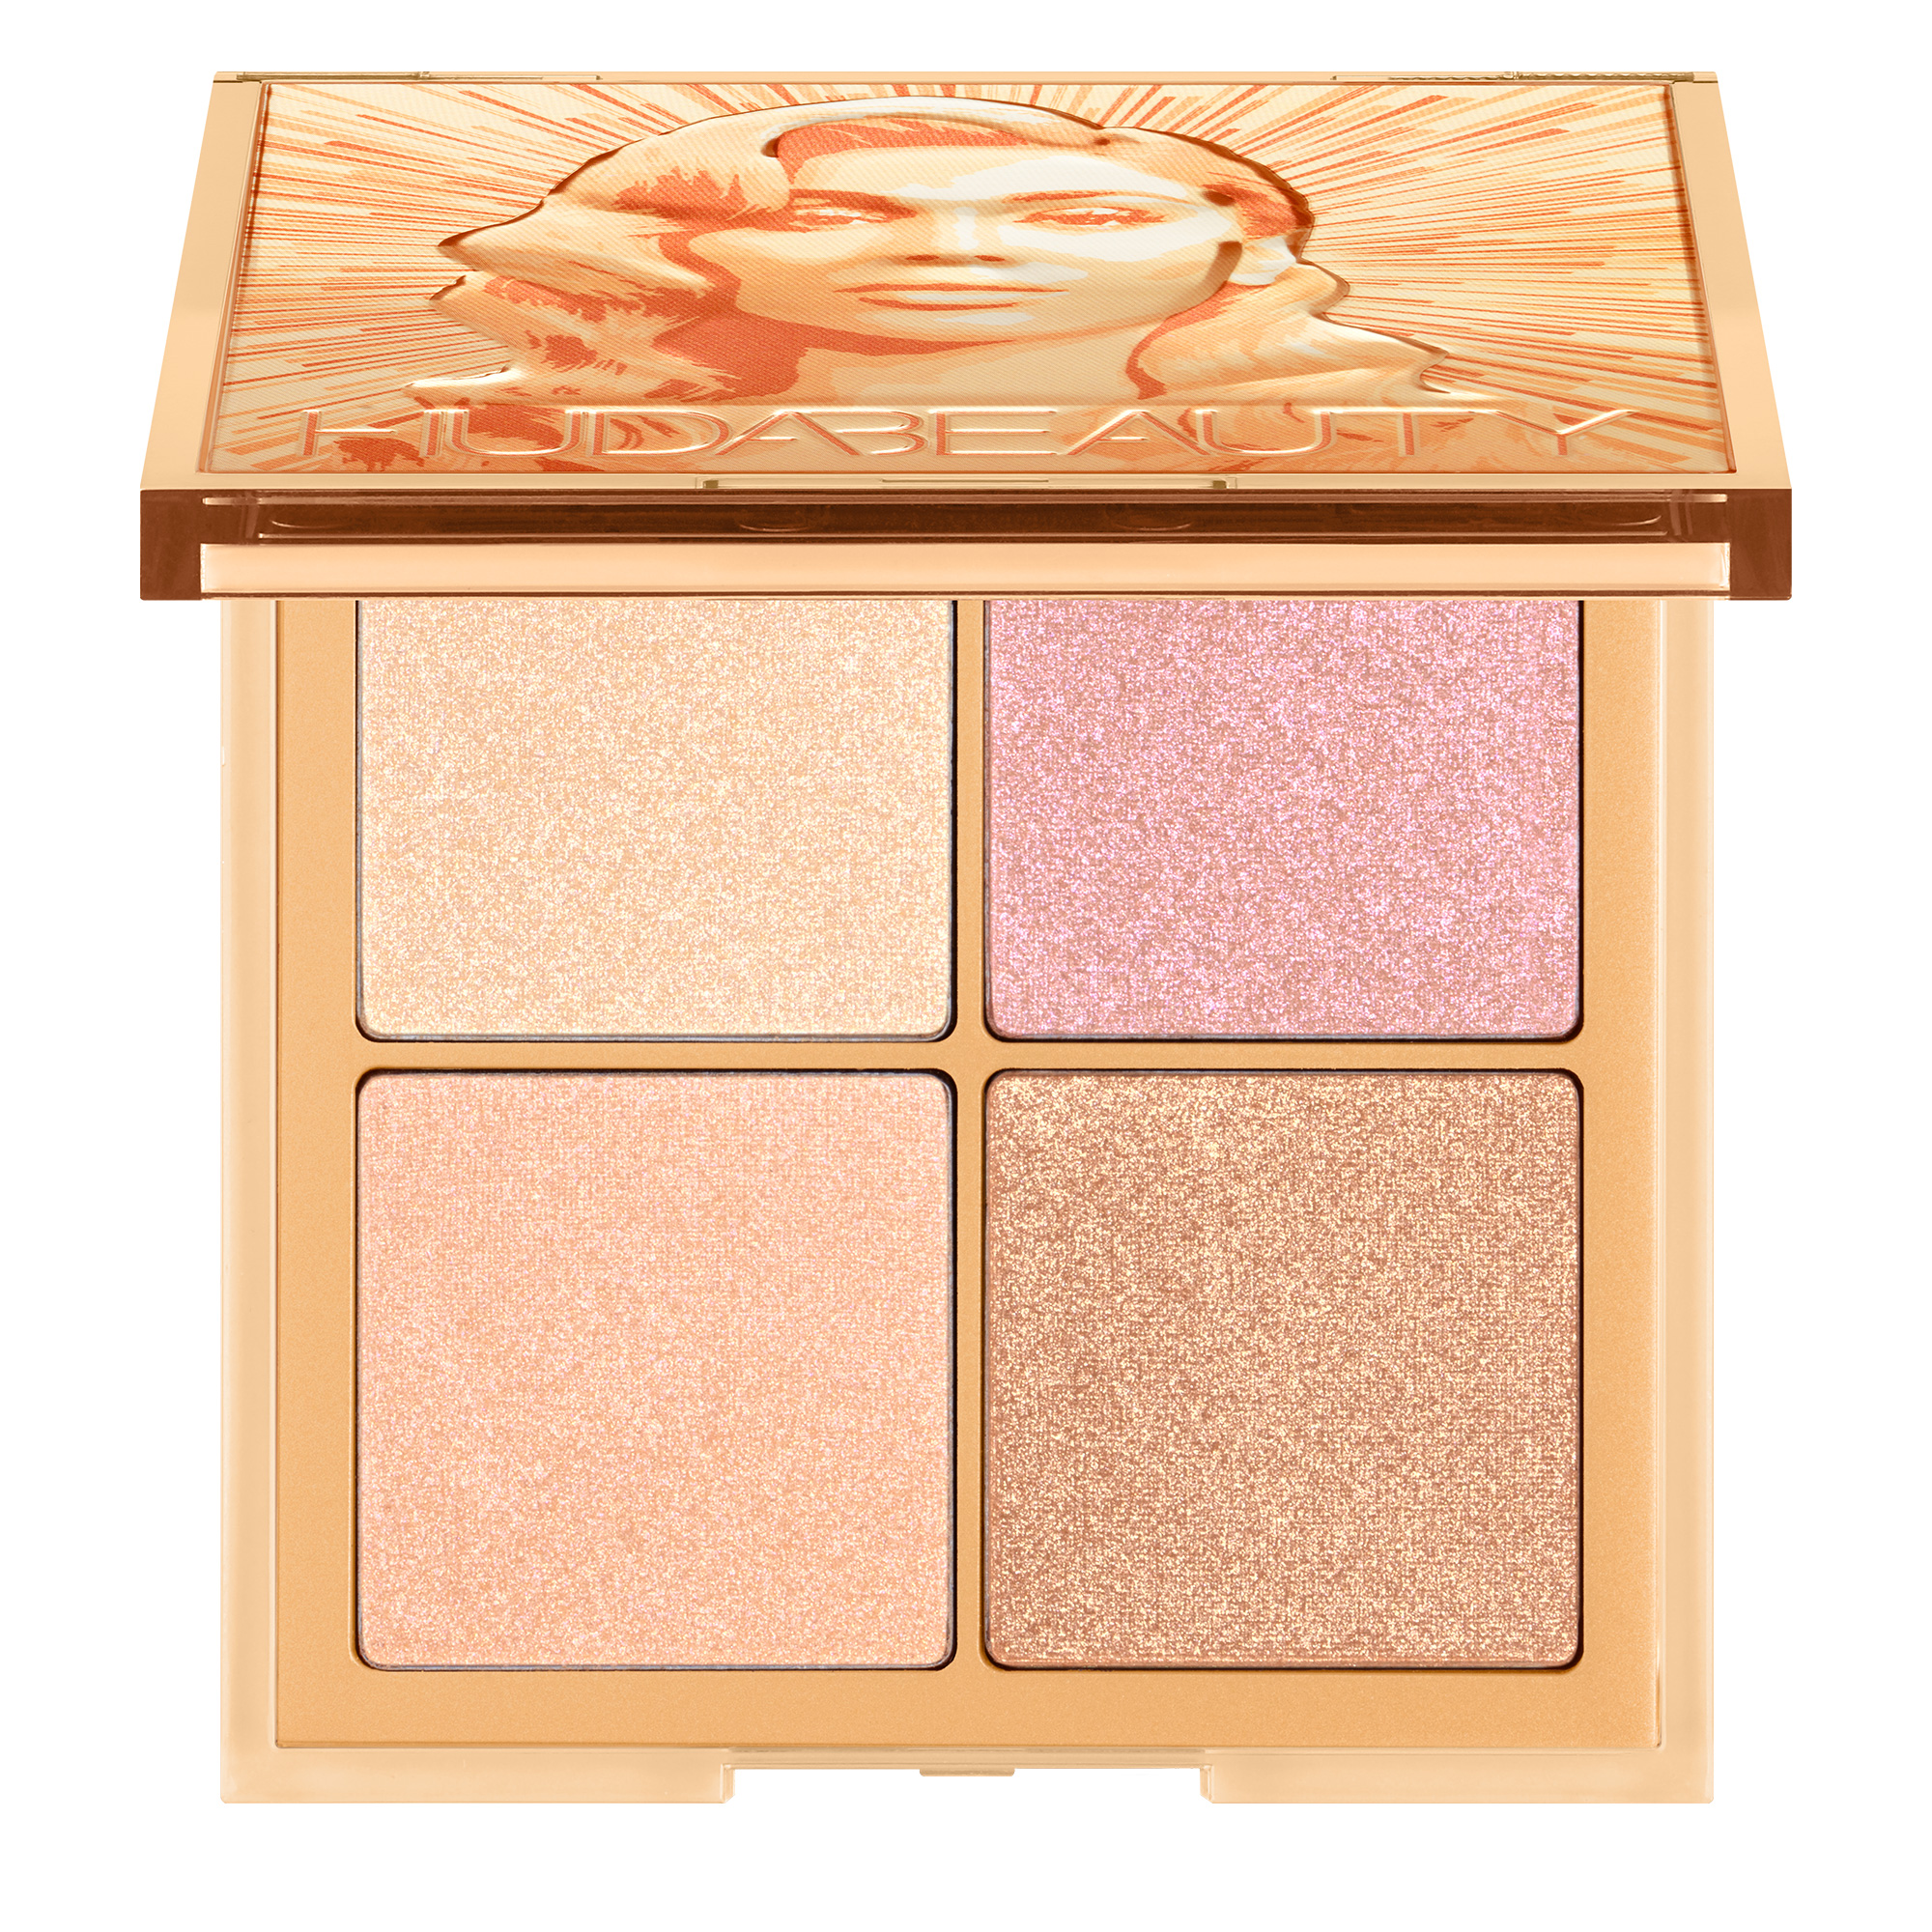 Glow Obsessions Highlighter Palette